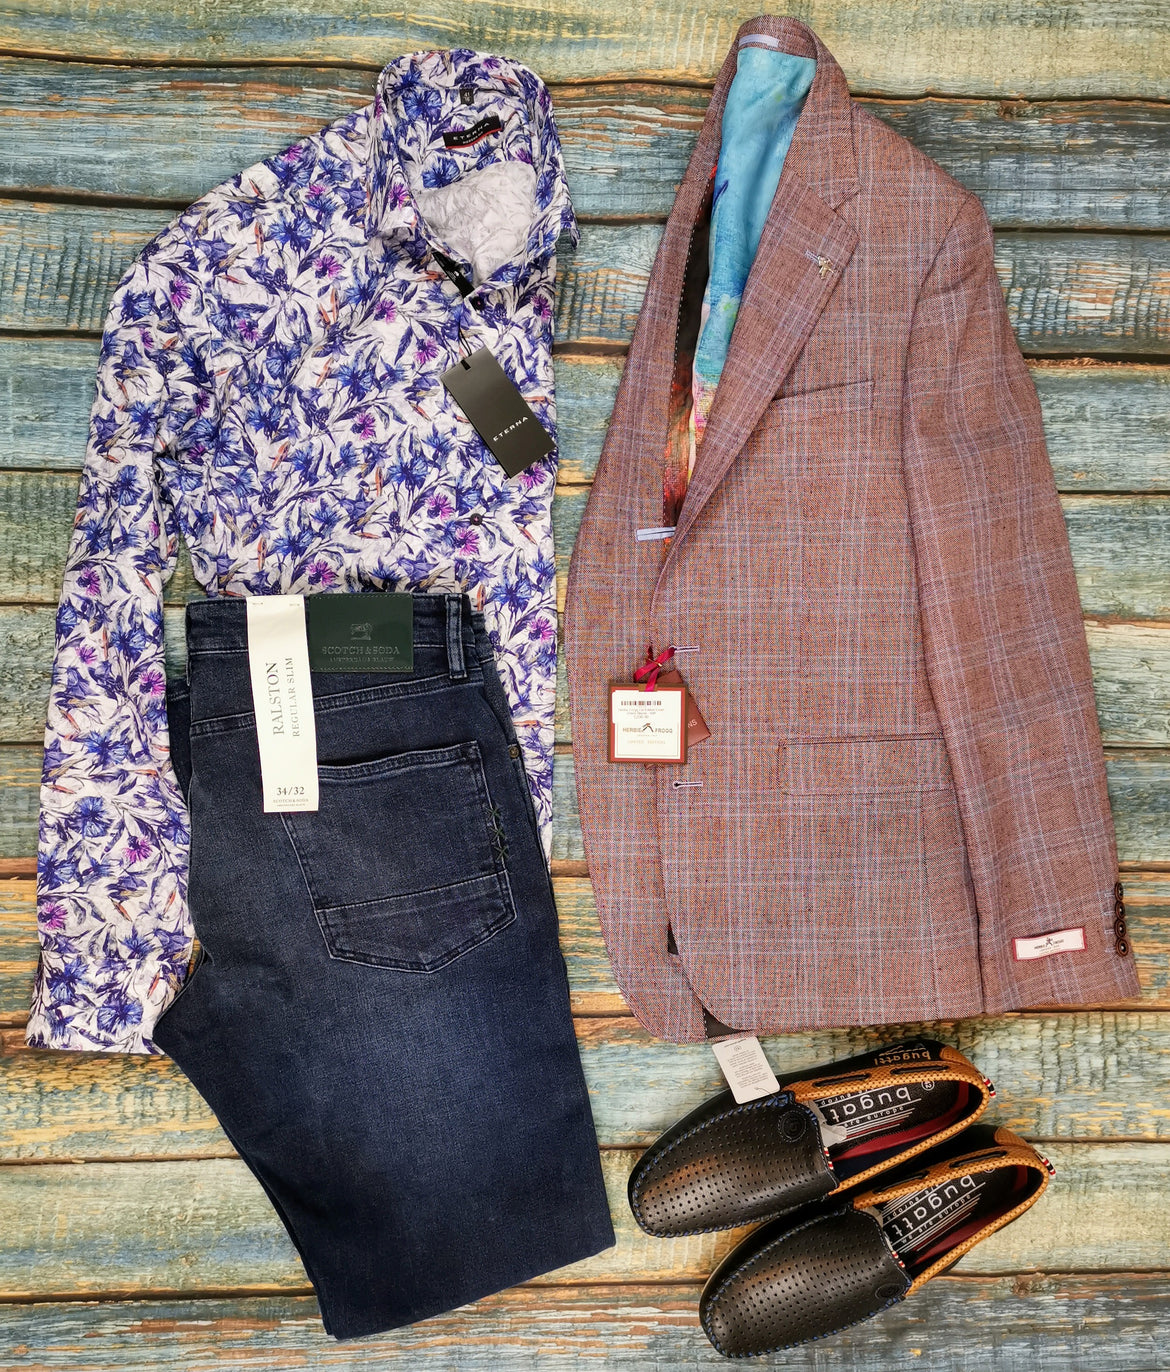 Linen Check blazer , jeans and loafers ....